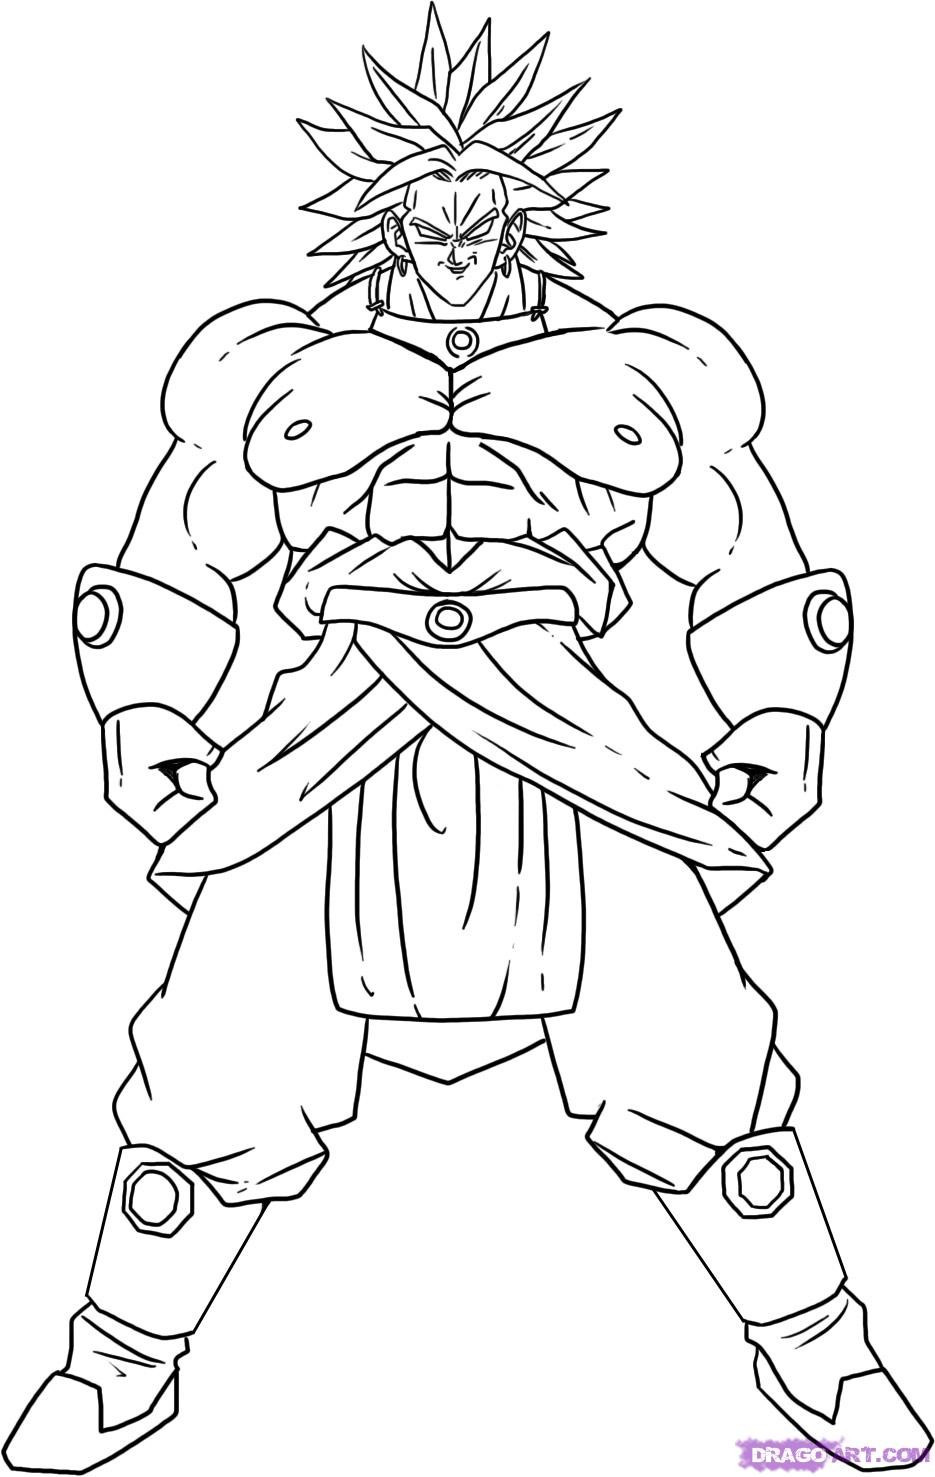 Dragon Ball Z Coloring Pages Printable
 Free Printable Dragon Ball Z Coloring Pages For Kids